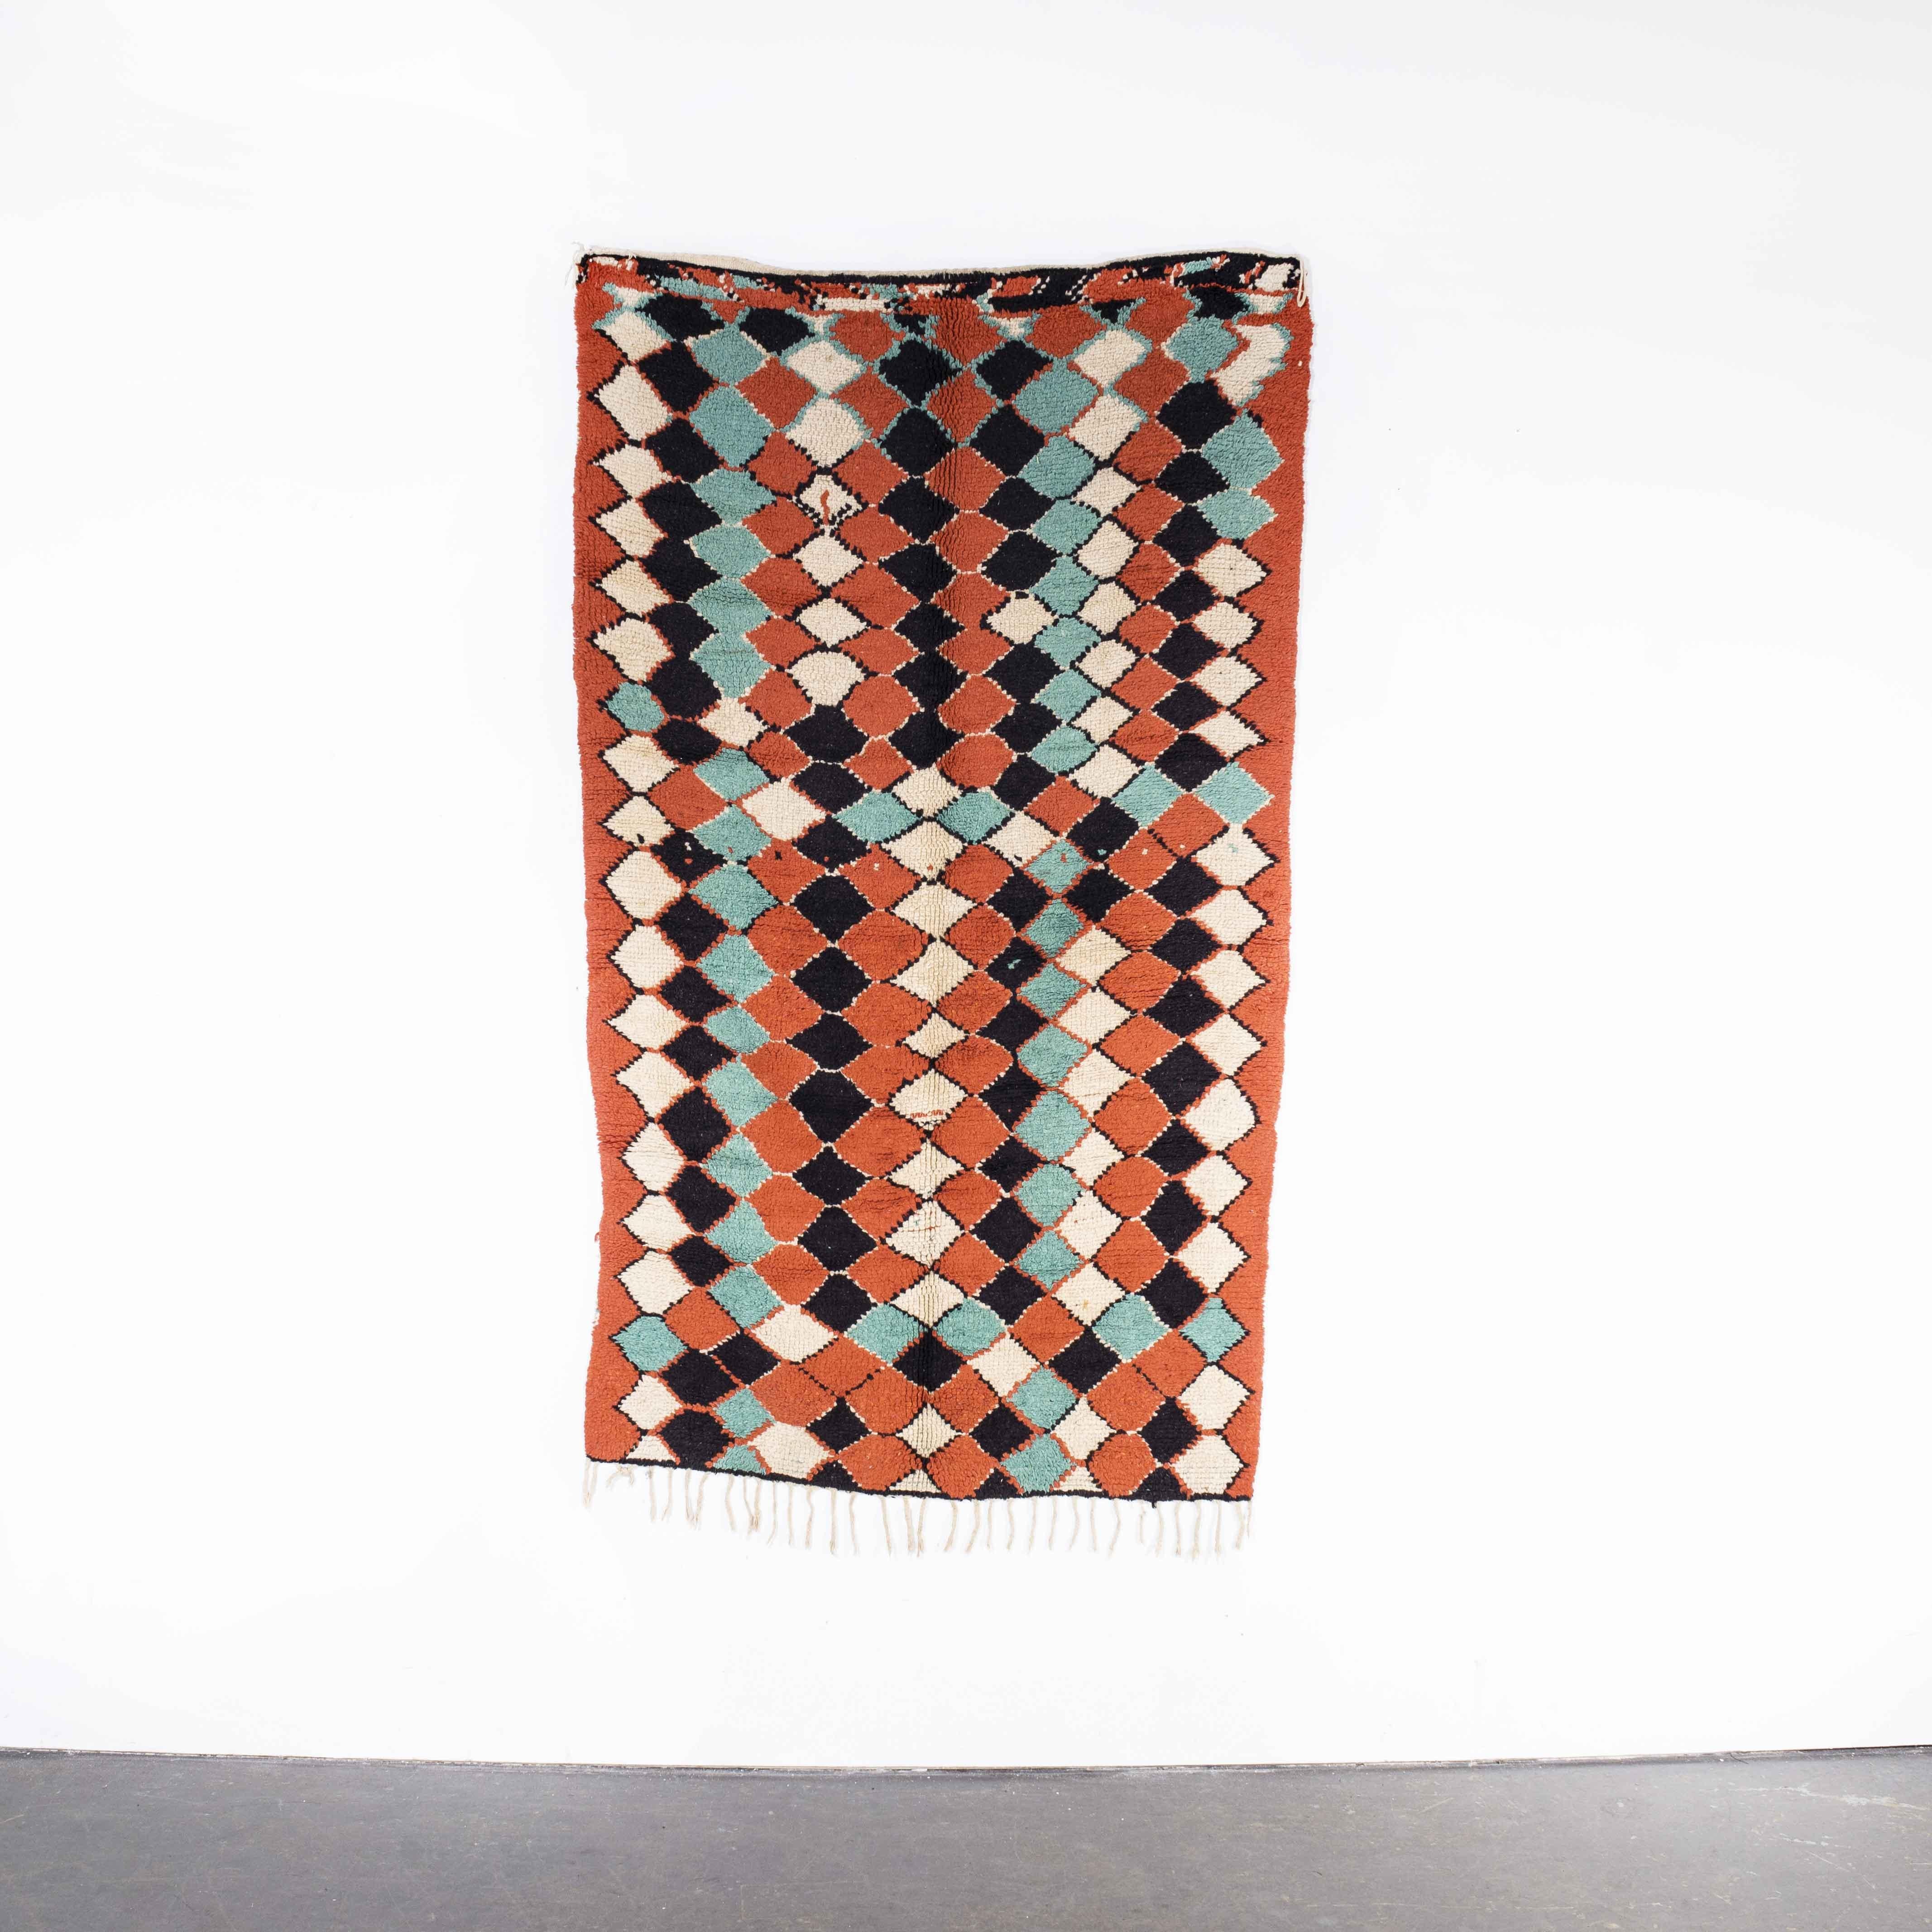 Vintage Berber Azilal rug – Bright Diamond Wool
Vintage Berber Azilal rug – Bright Diamond Wool. Azilal rugs are the most exuberant and colourful of Berber rugs, Diamonds shapes and strong lines play heavily into the design of Azilal rugs. They are